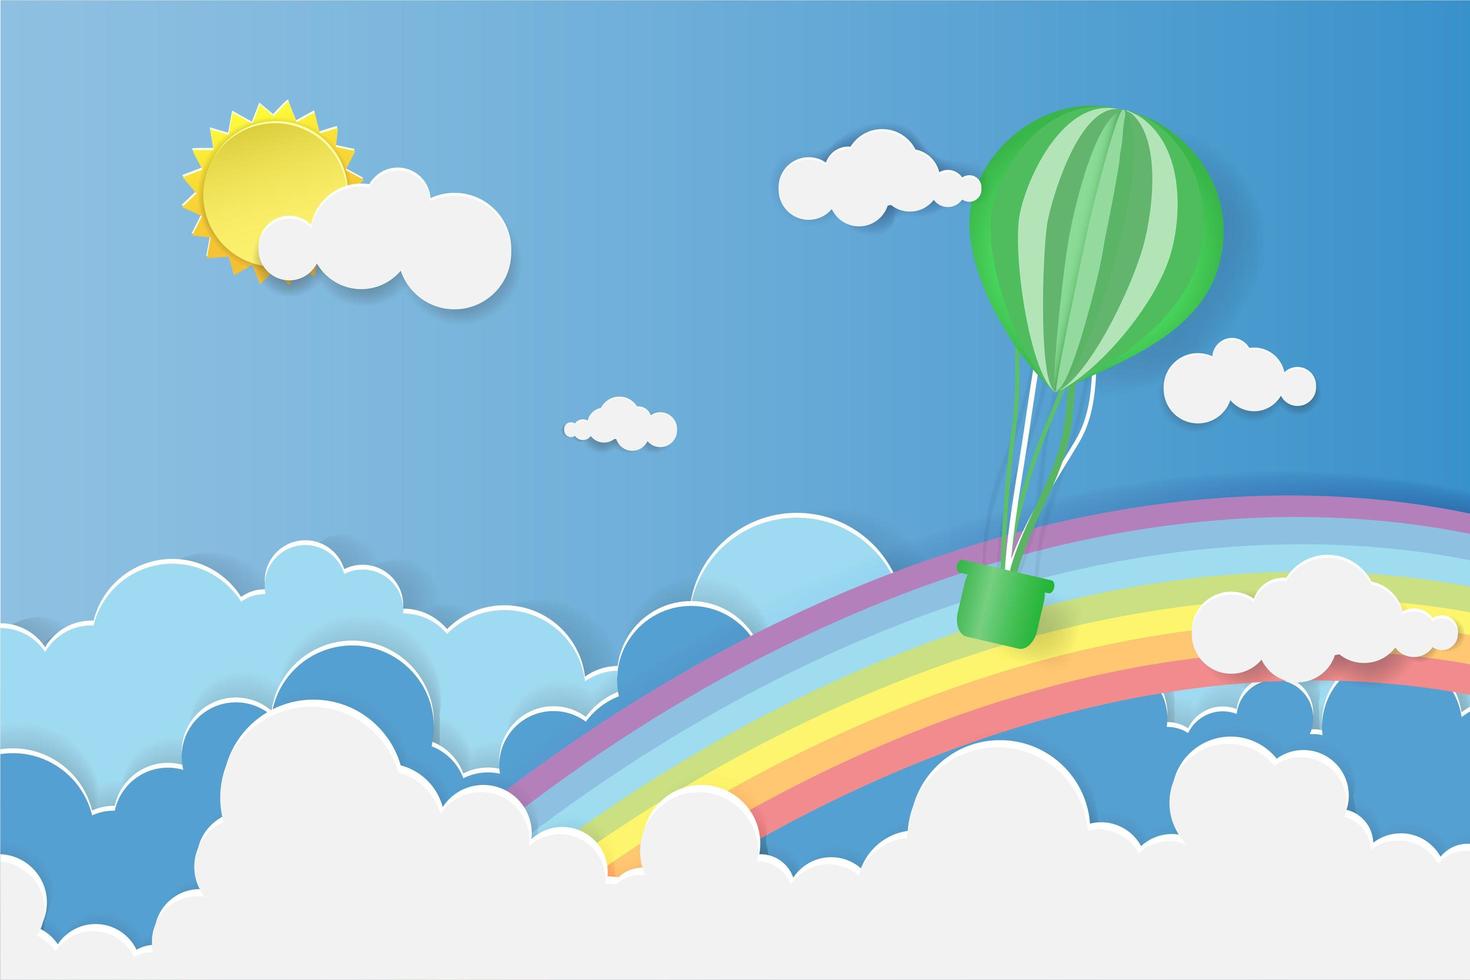 Balloon floating over cloud with rainbow vector